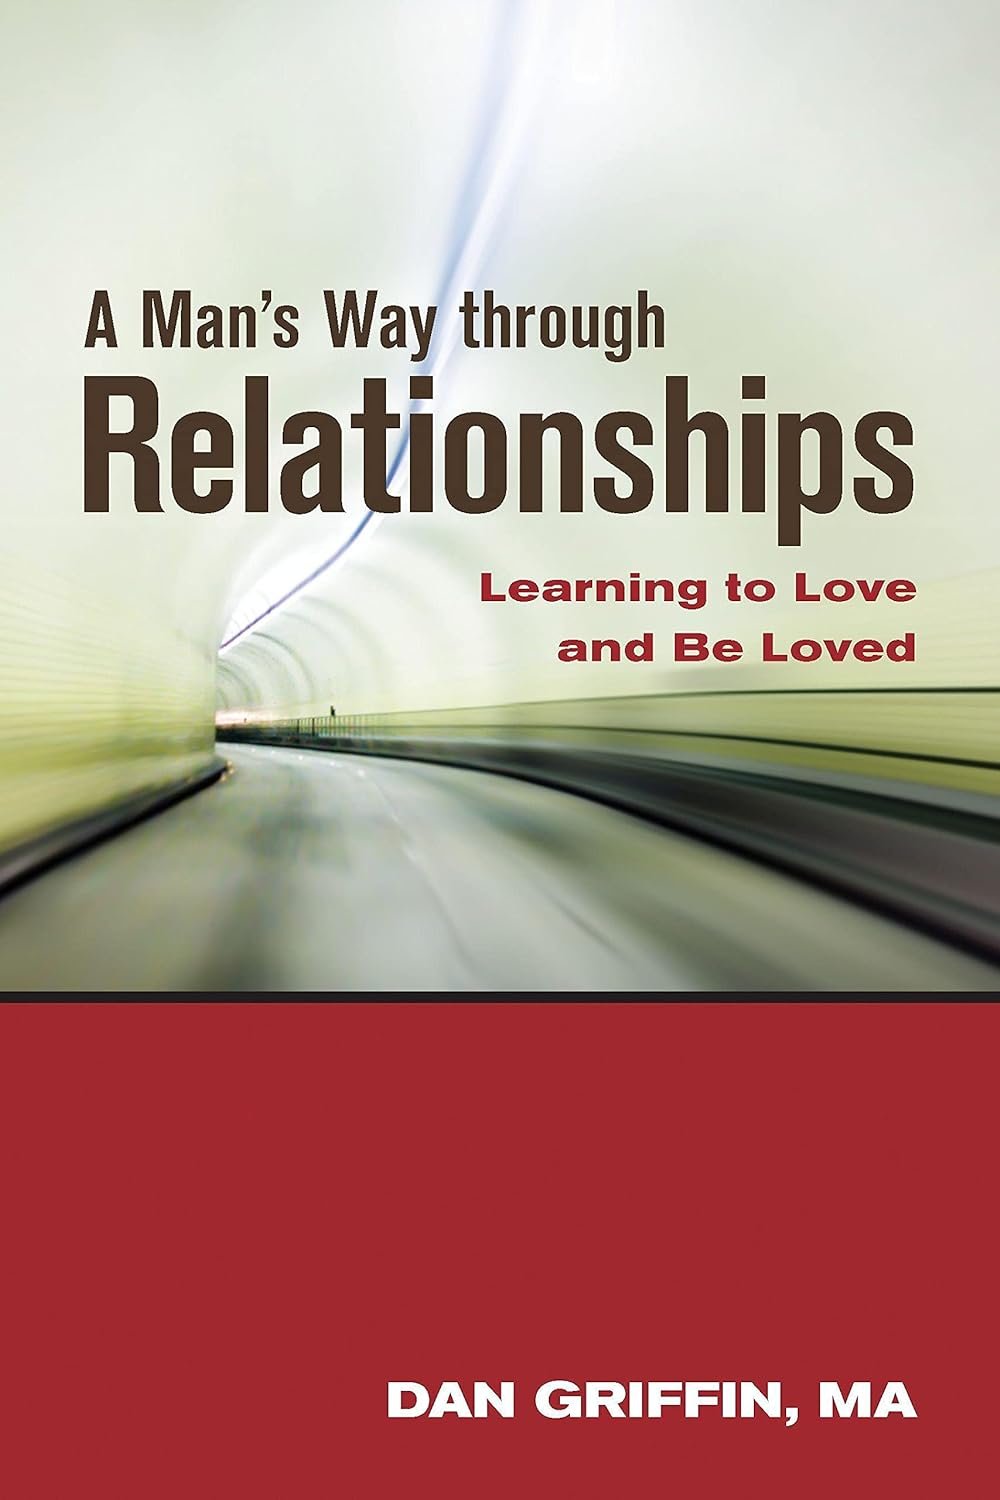 A Man's Way through Relationships: Learning to Love and Be Loved